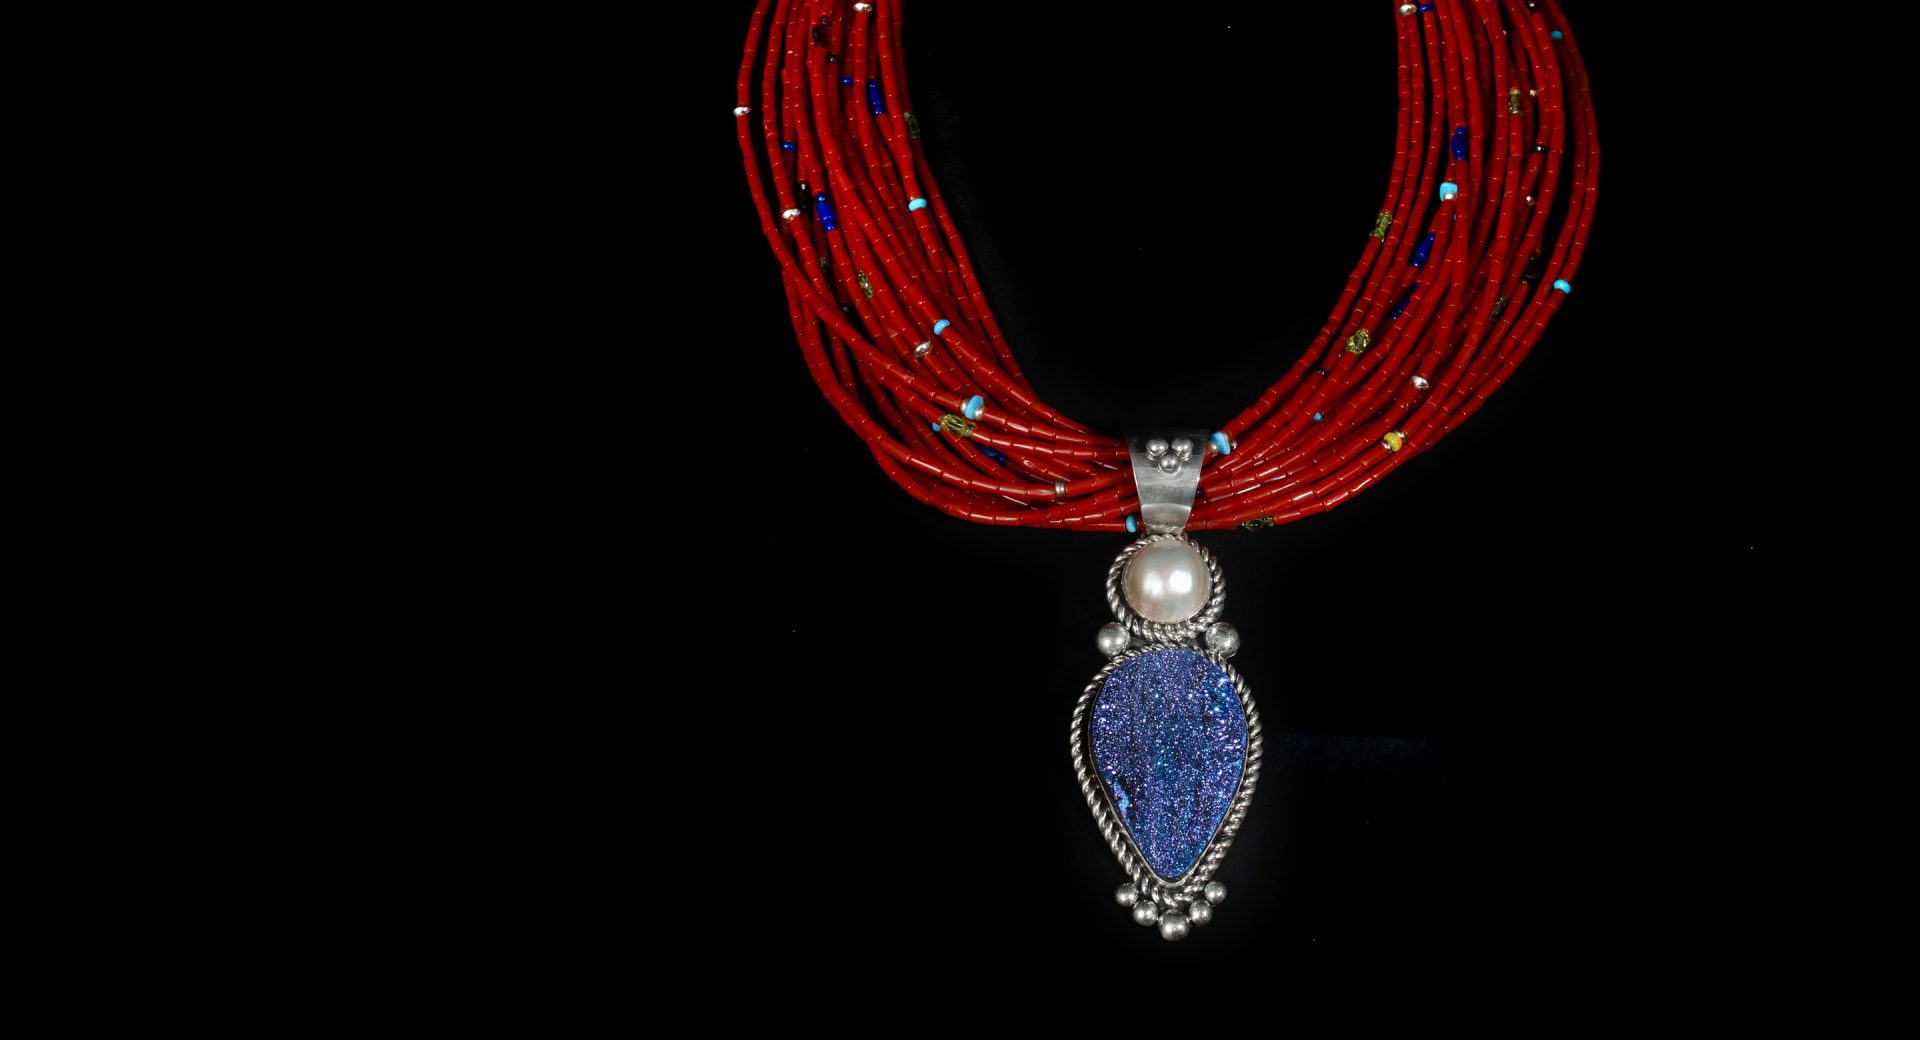 A necklace with red beads and a blue pendant and pearls.